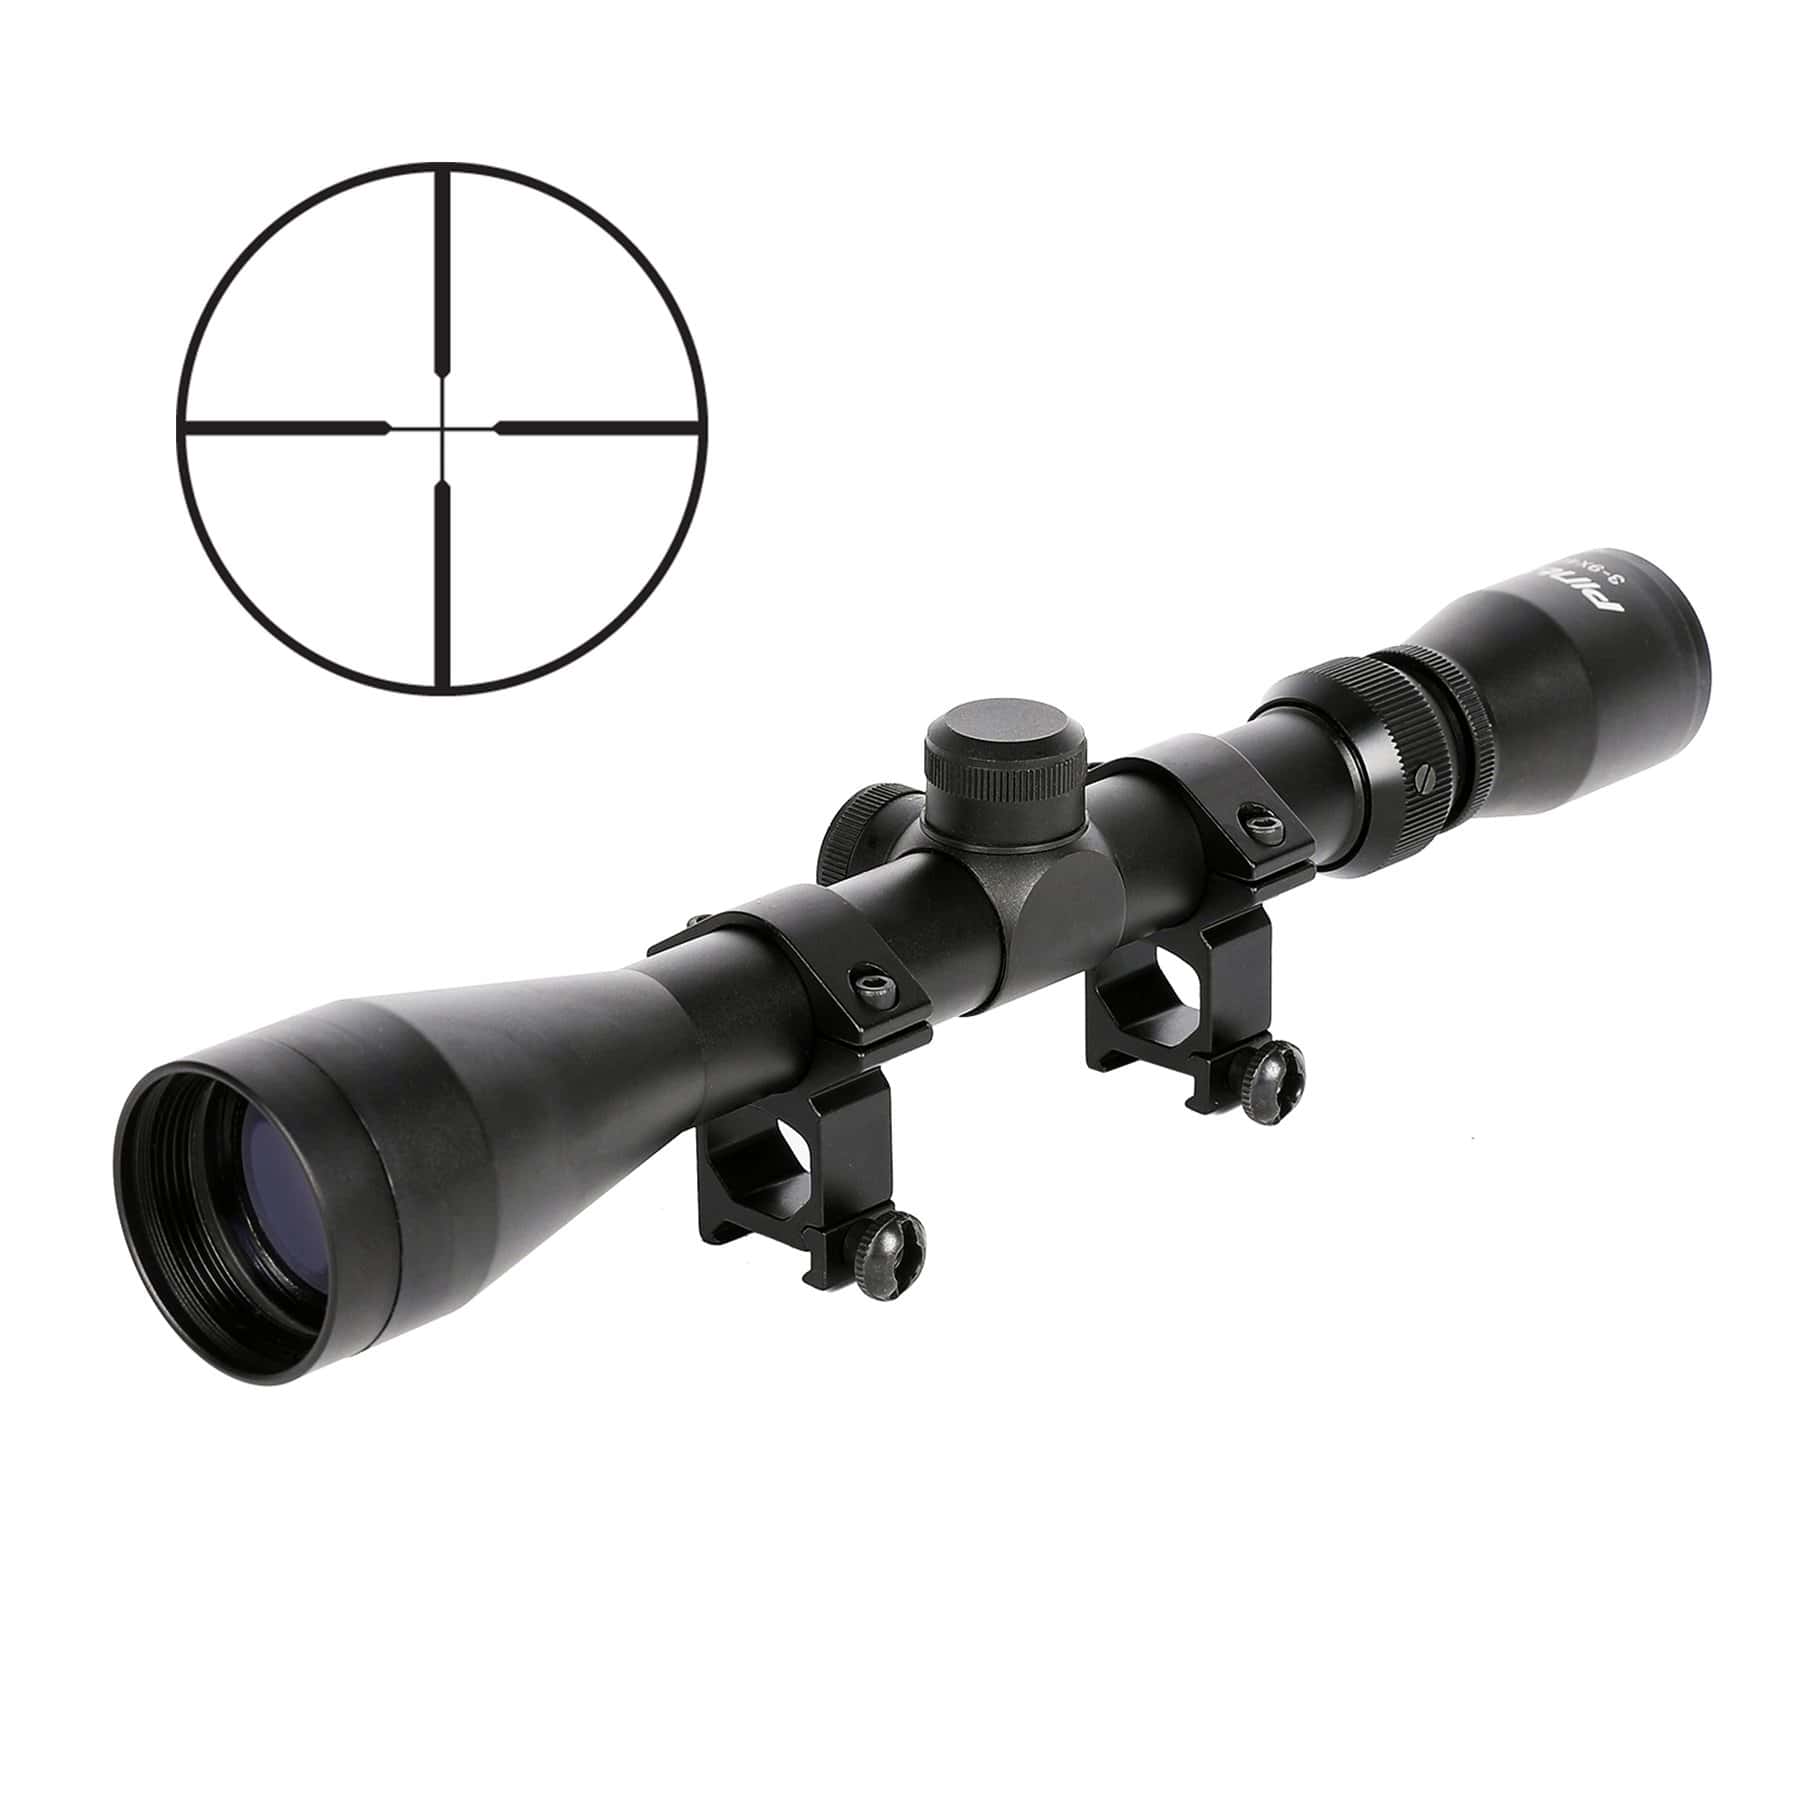 Pinty 3-9X40mm Duplex Optical Hunting Rifle Scope/Red Laser/Torch Combo